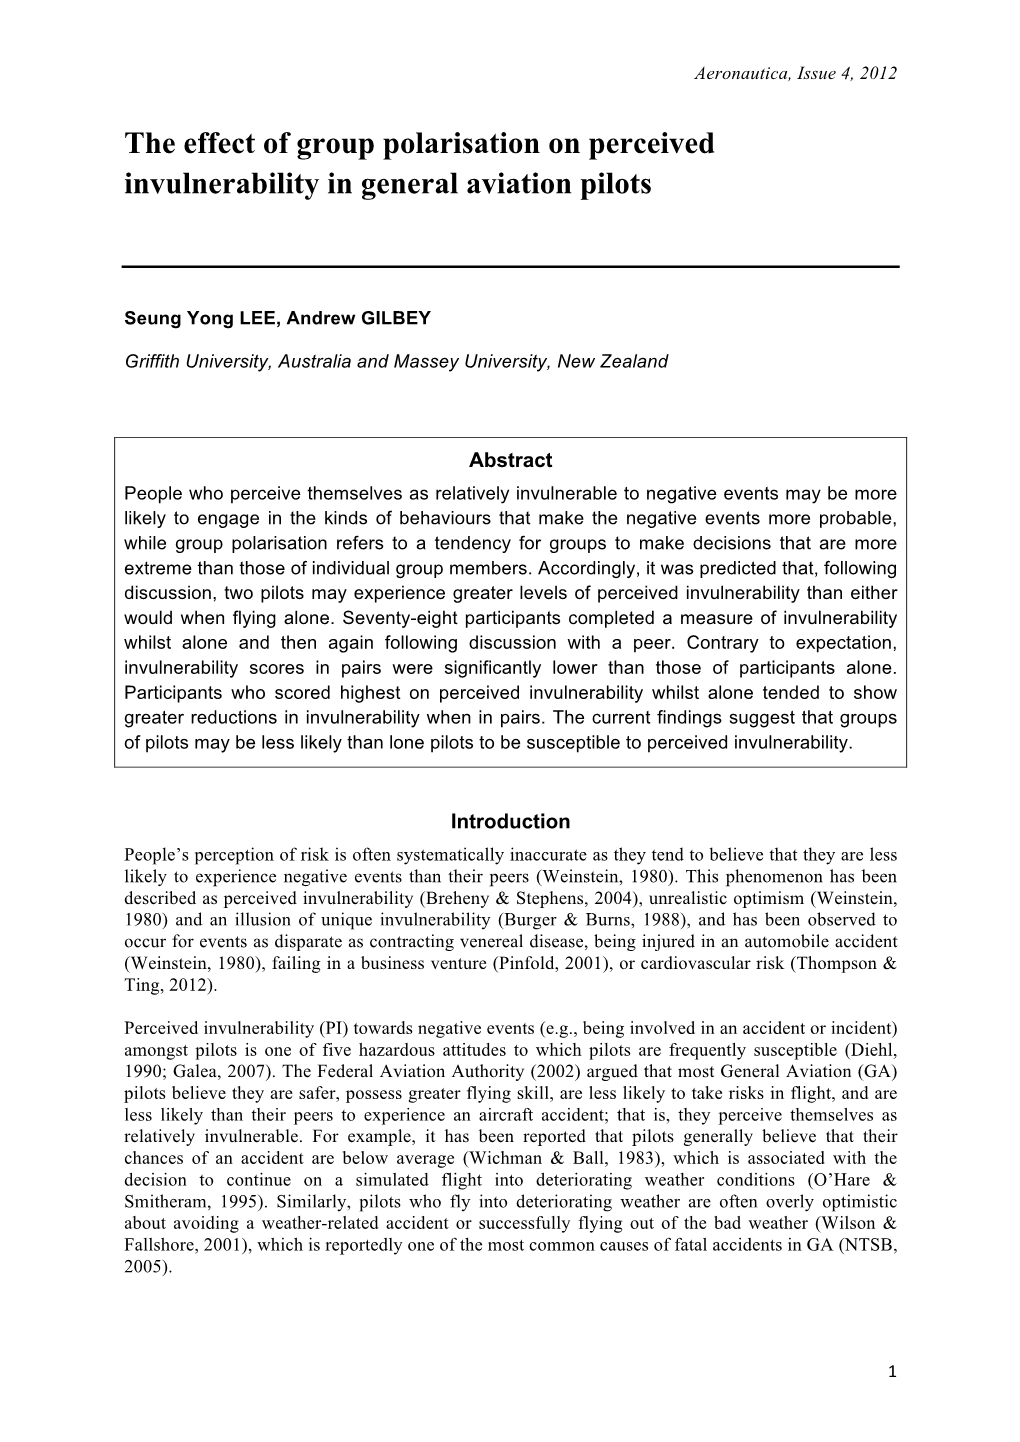 The Effect of Group Polarisation on Perceived Invulnerability in General Aviation Pilots